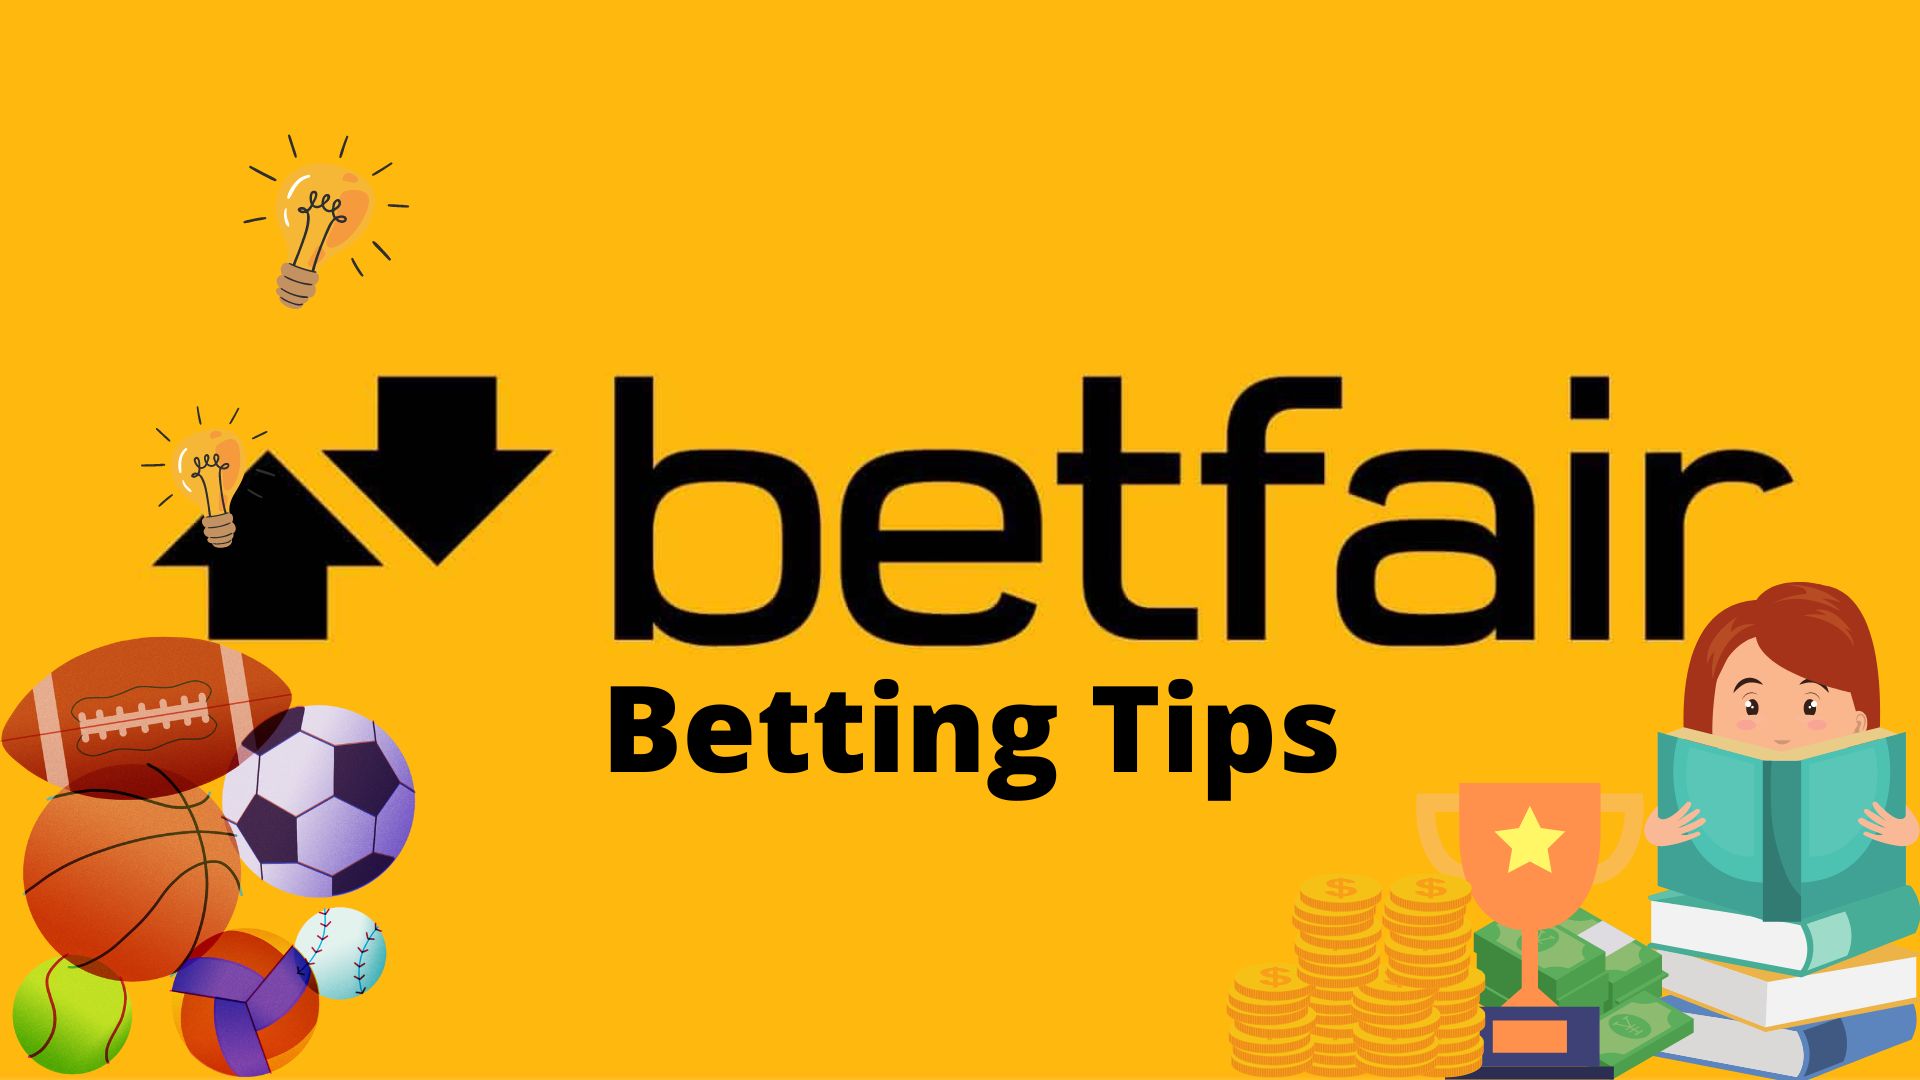 Sports Betting Tips From Betfair